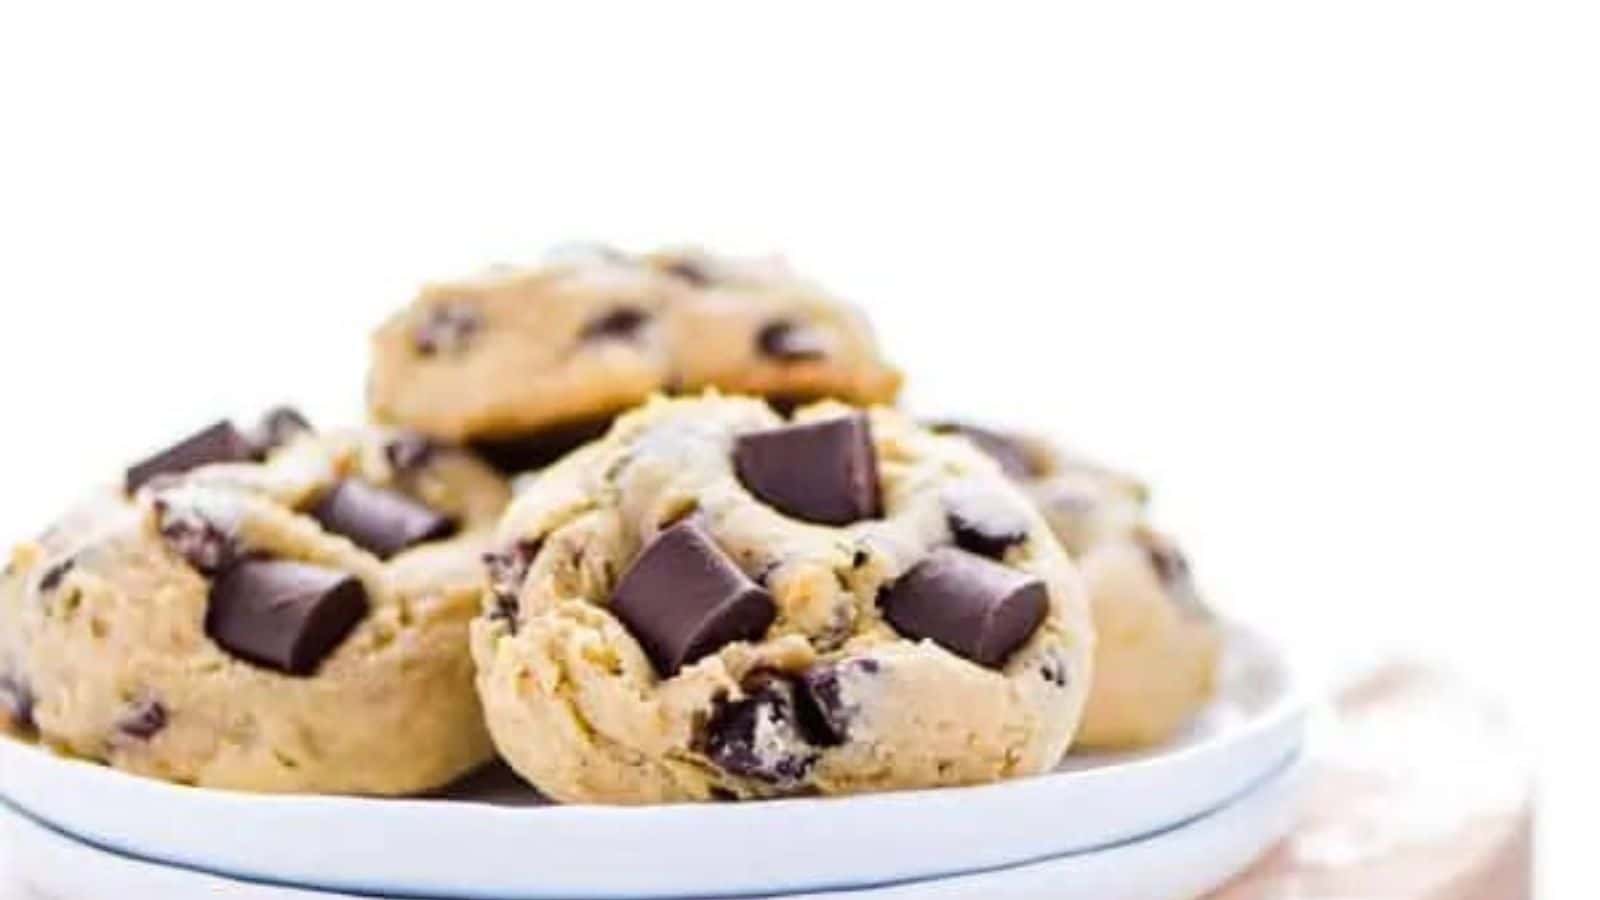 Chocolate chip cookies on a white plate.